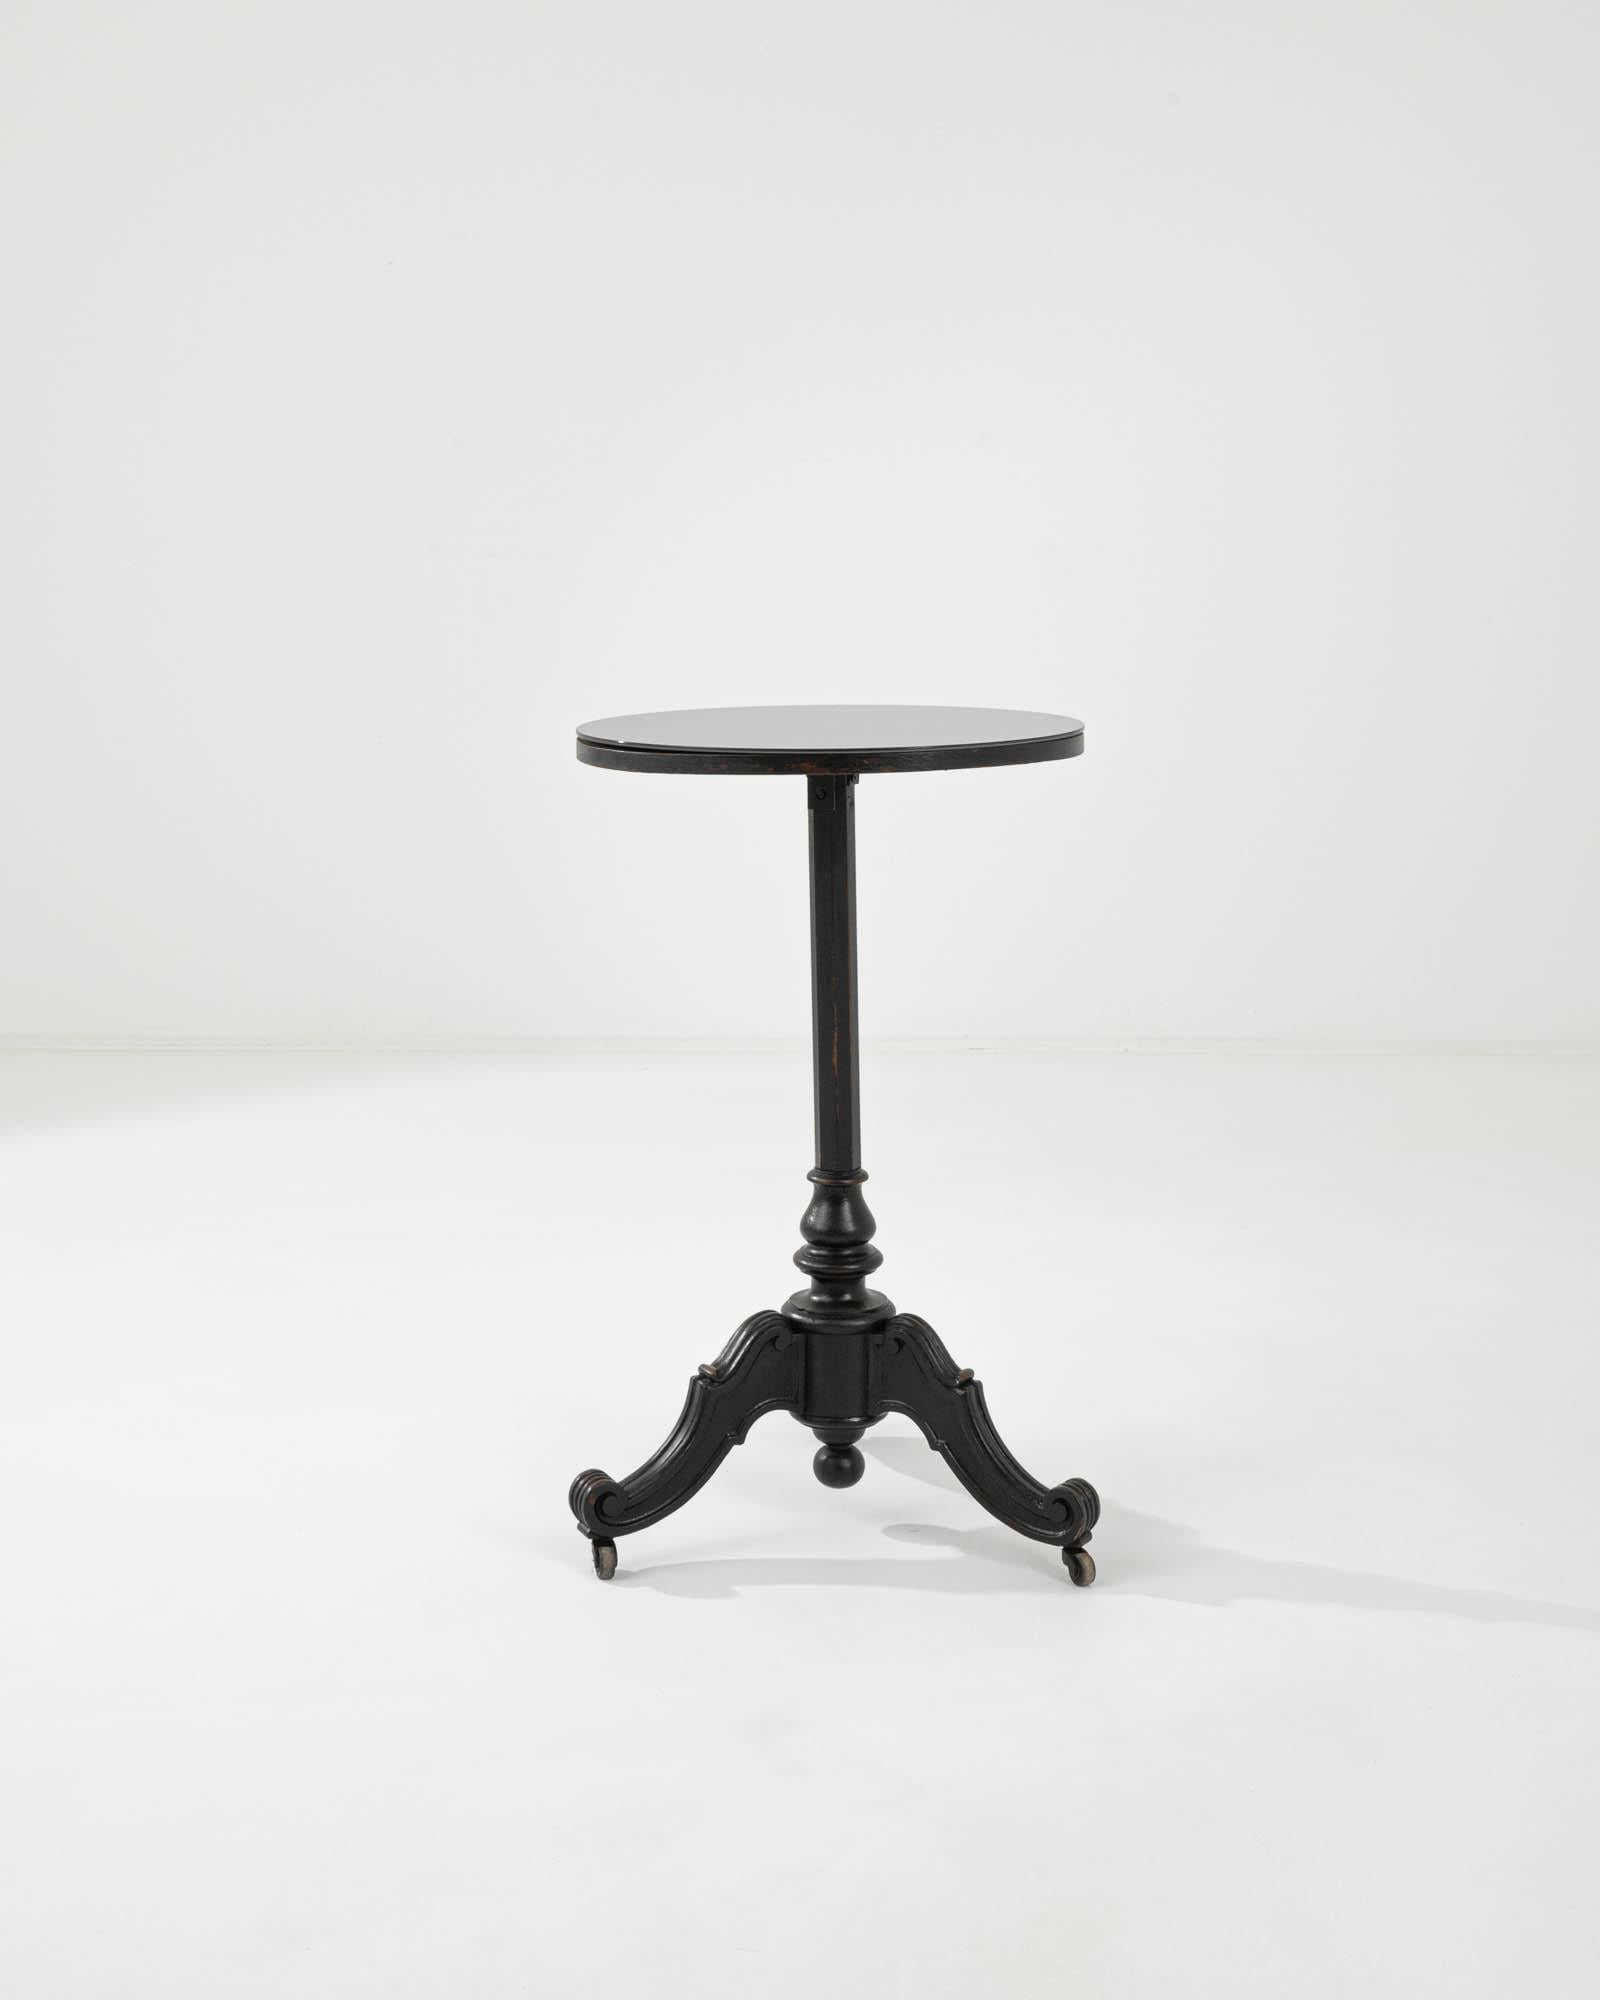 This vintage wooden side table on wheels offers a sophisticated period piece. Made in France in the 20th century, a circular tabletop sits atop a faceted central column; the cascading scrolls of the tripod feet create an elegant profile. Small